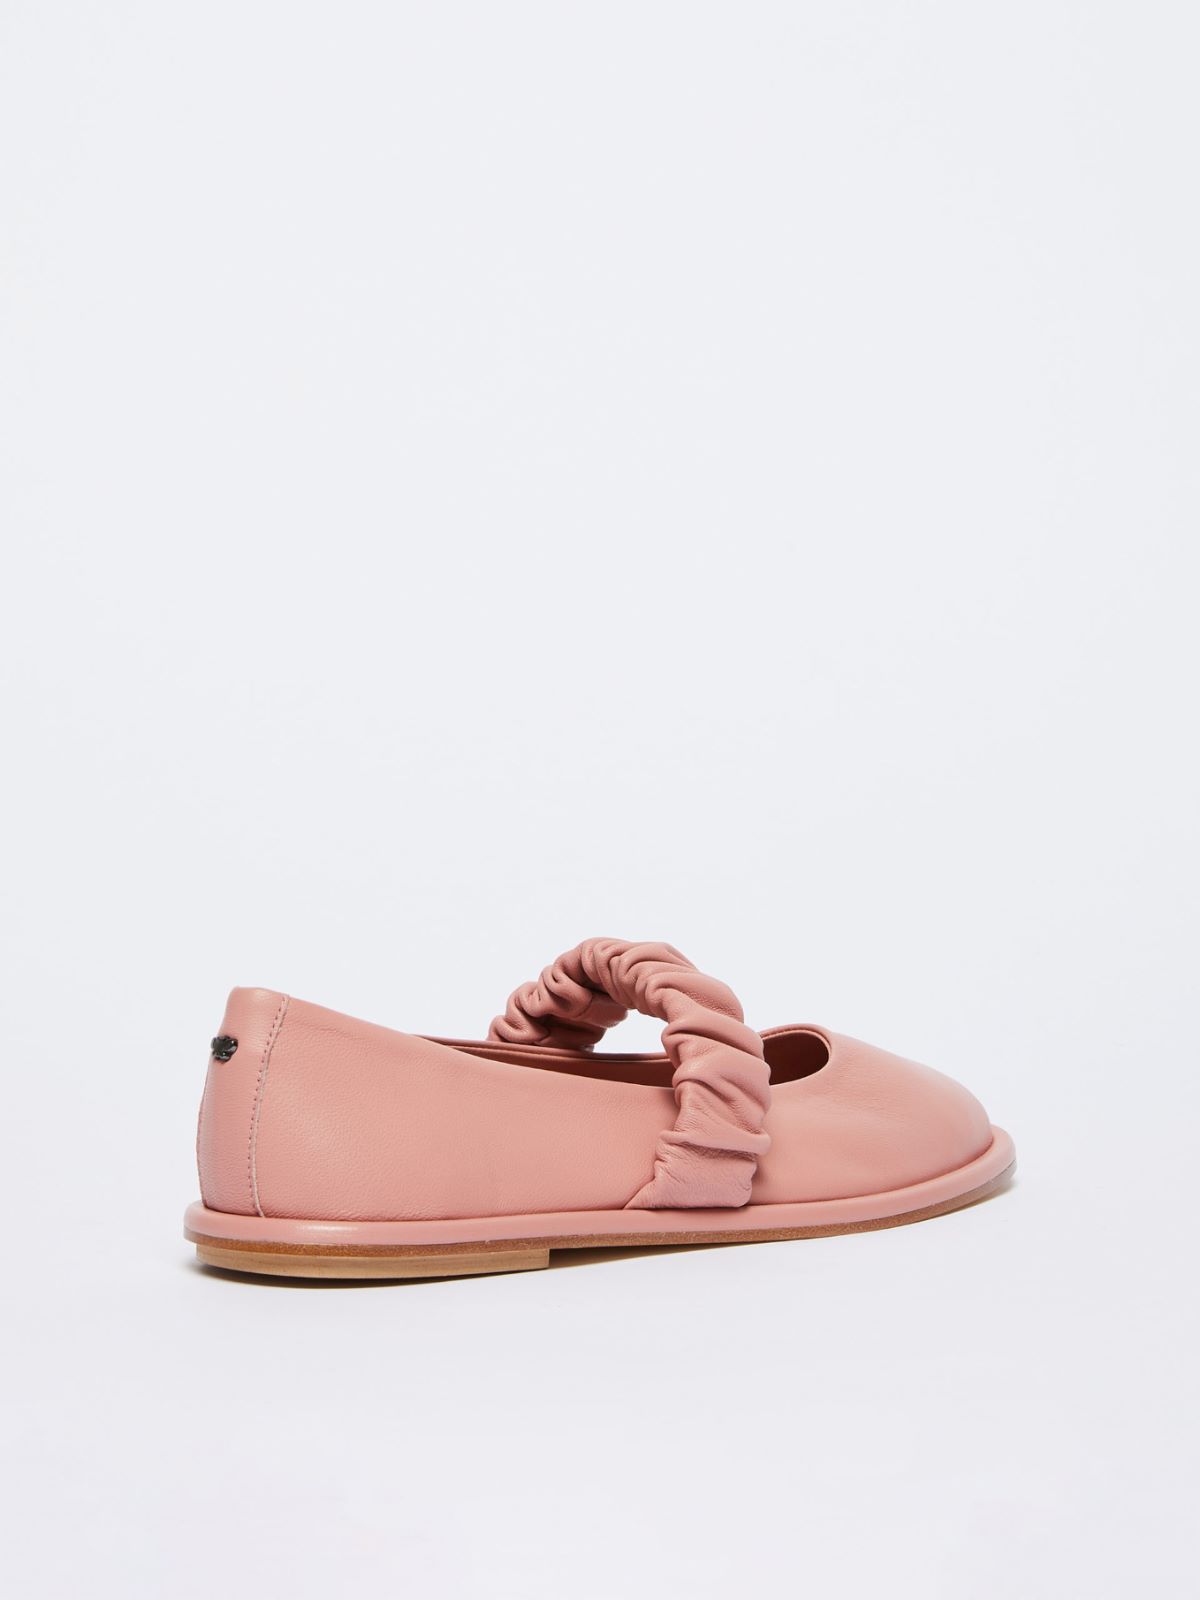 Ballet flats in nappa leather - ANTIQUE ROSE - Weekend Max Mara - 3